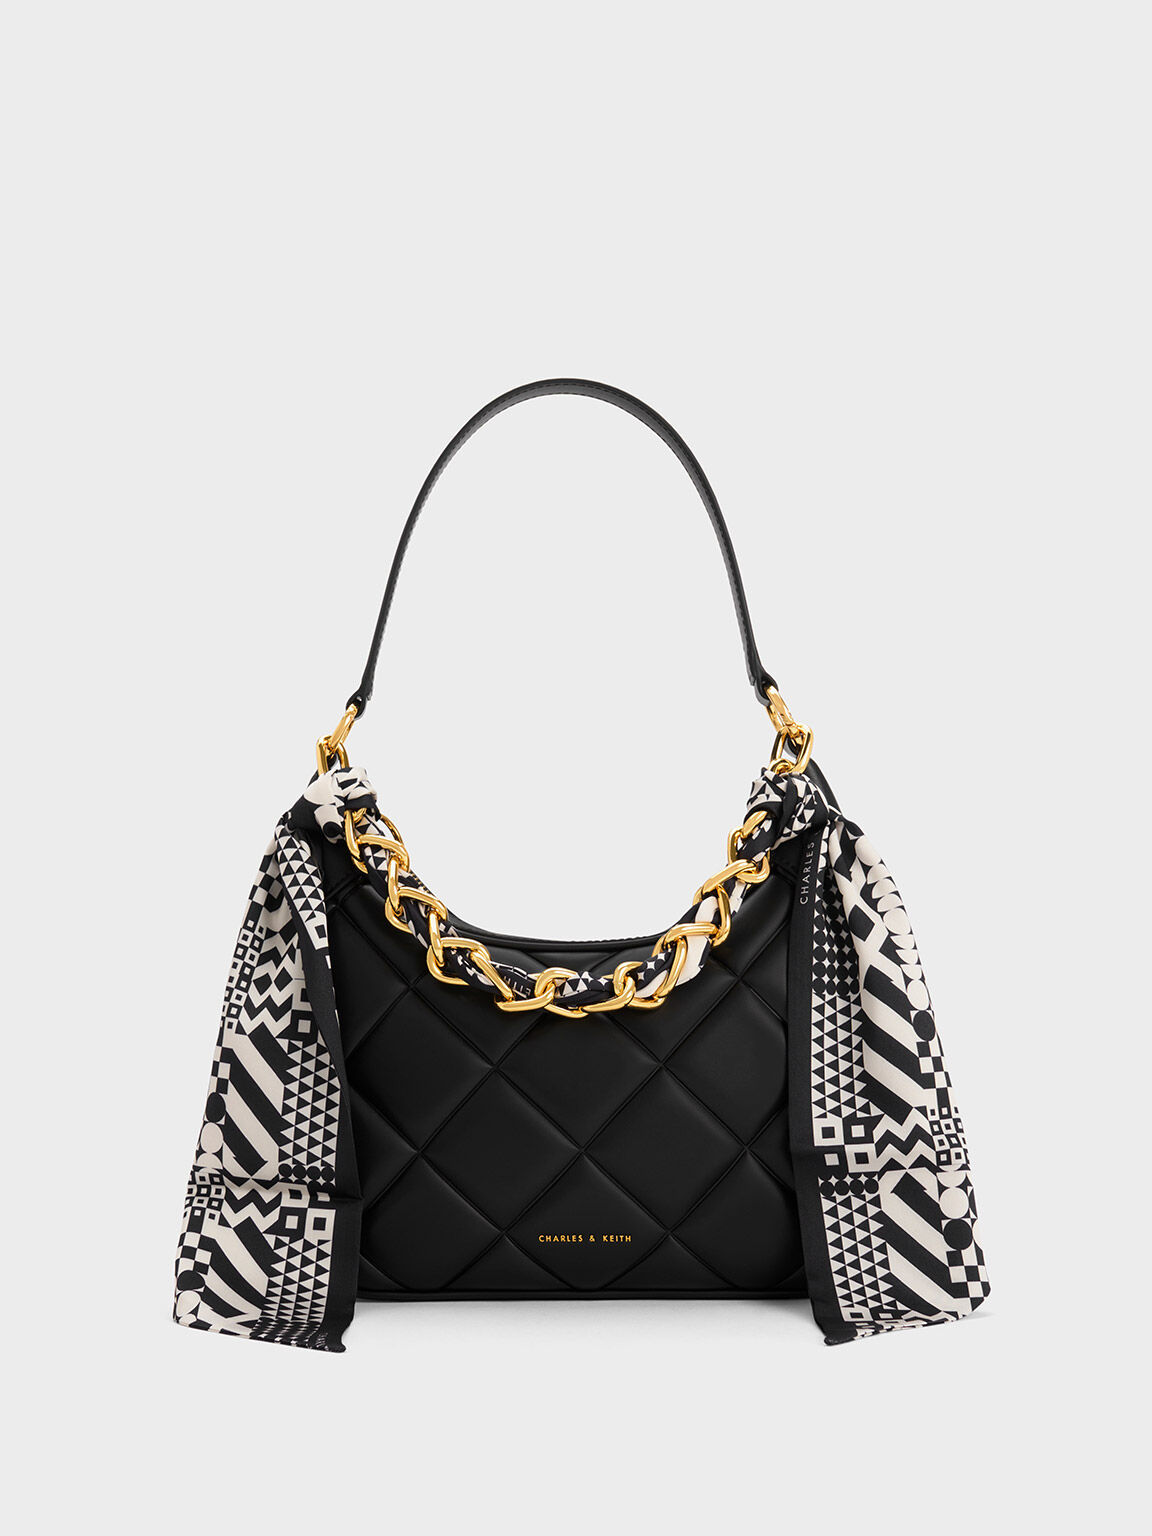 Women's Bags | Shop Exclusive Styles | CHARLES & KEITH VN